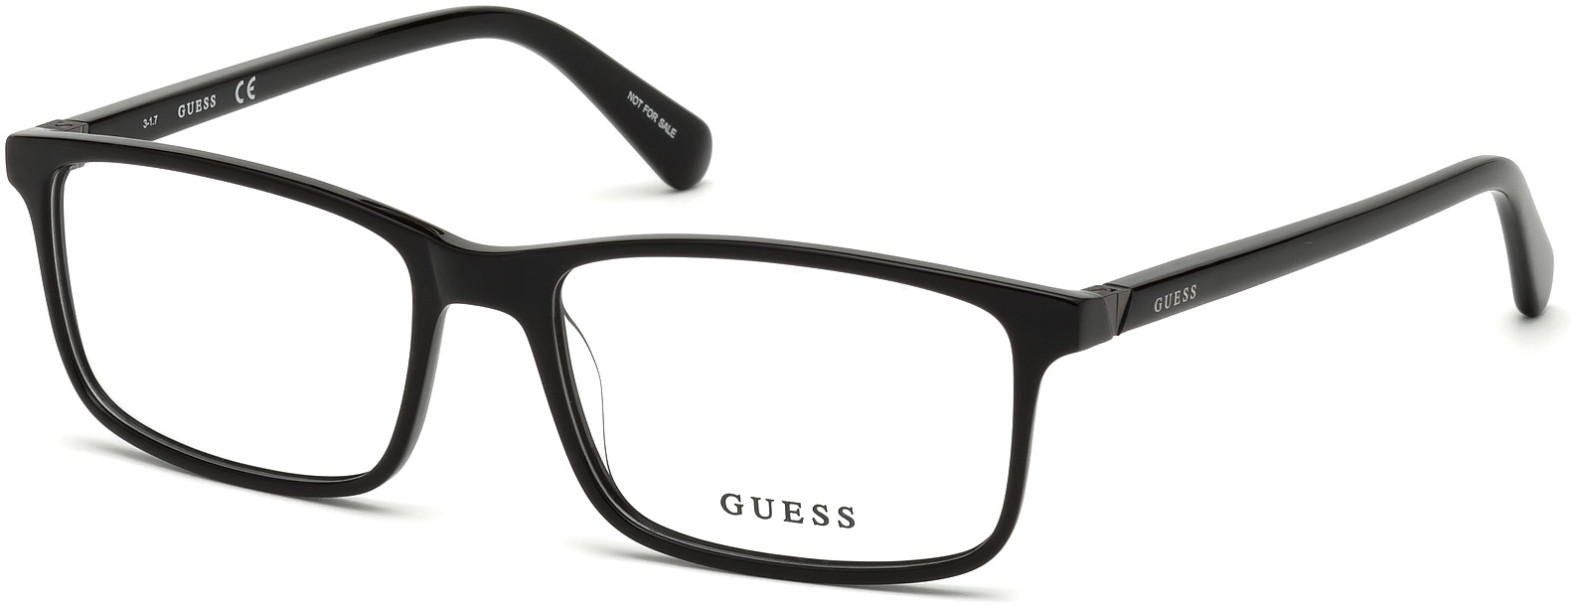 GUESS 1948 001